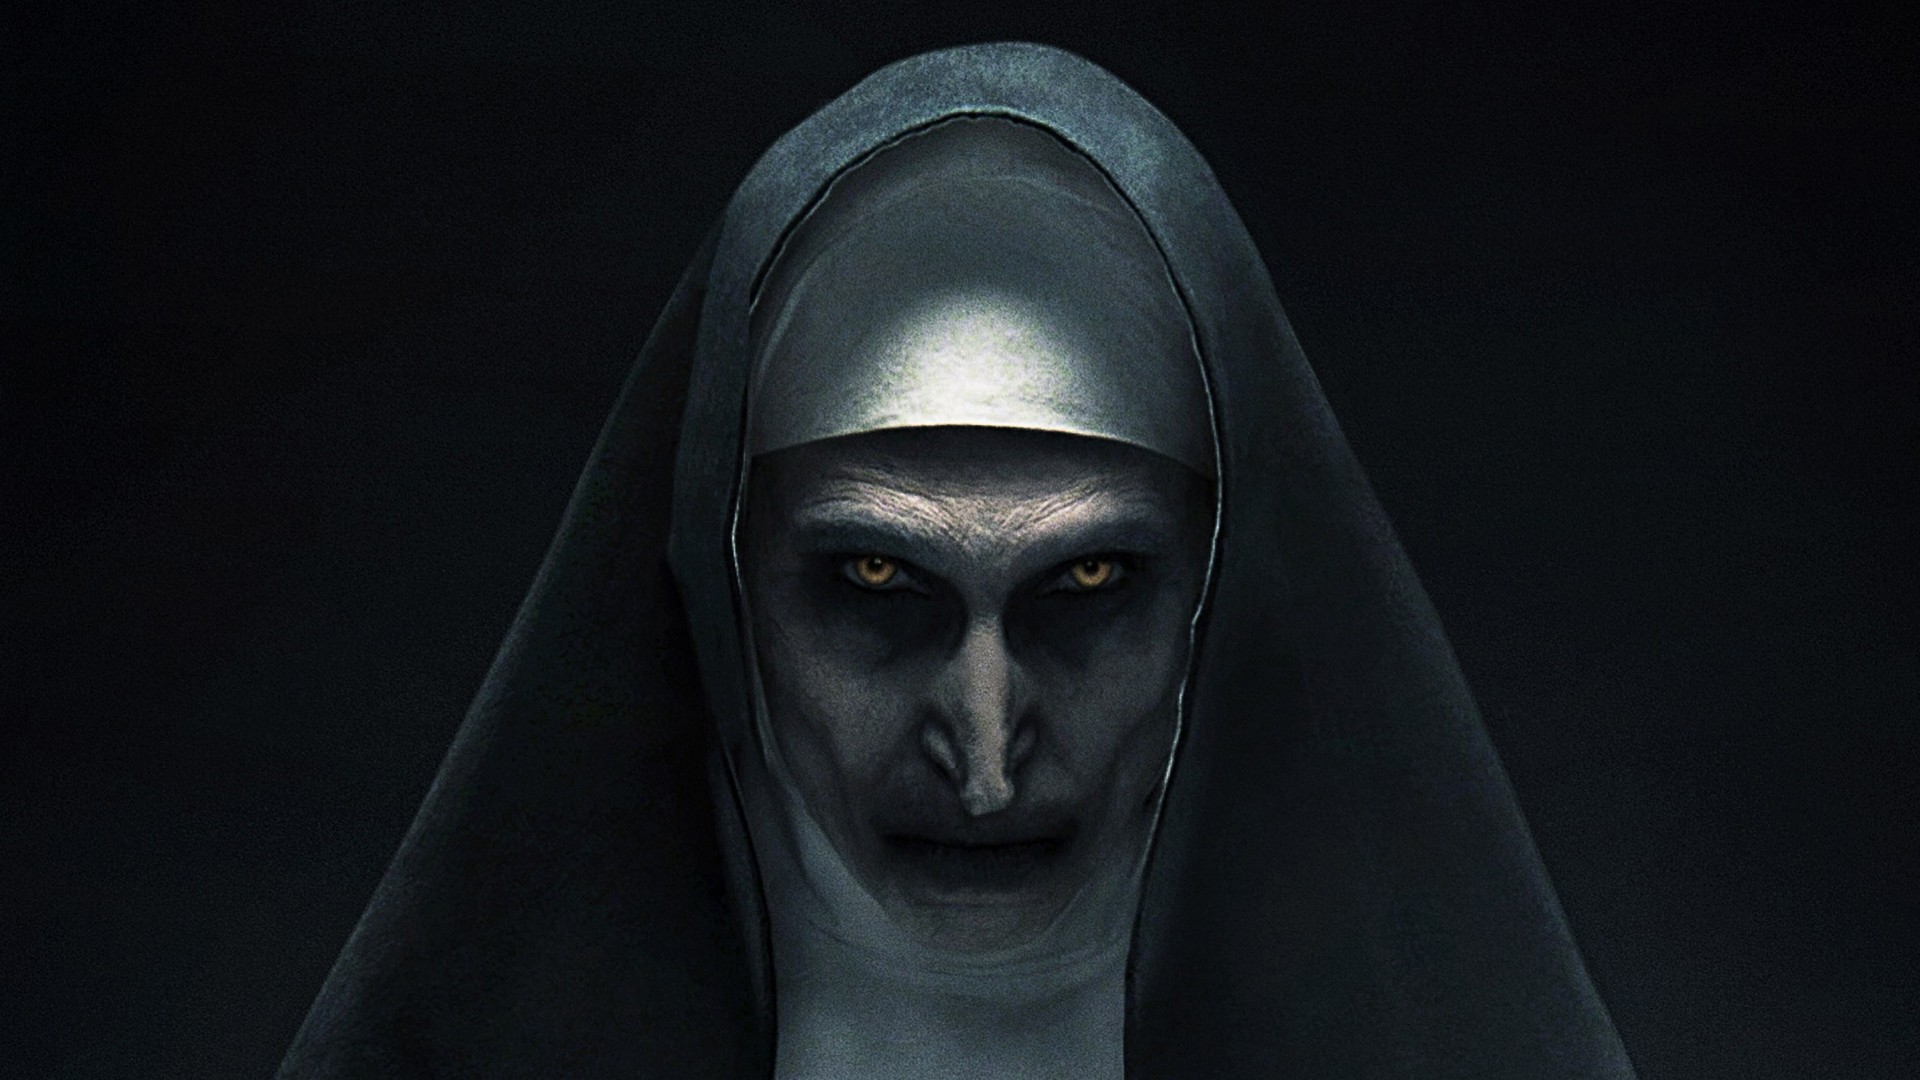 Wallpaper The Nun HD With Resolution 1920X1080 pixel. You can make this wallpaper for your Desktop Computer Backgrounds, Mac Wallpapers, Android Lock screen or iPhone Screensavers